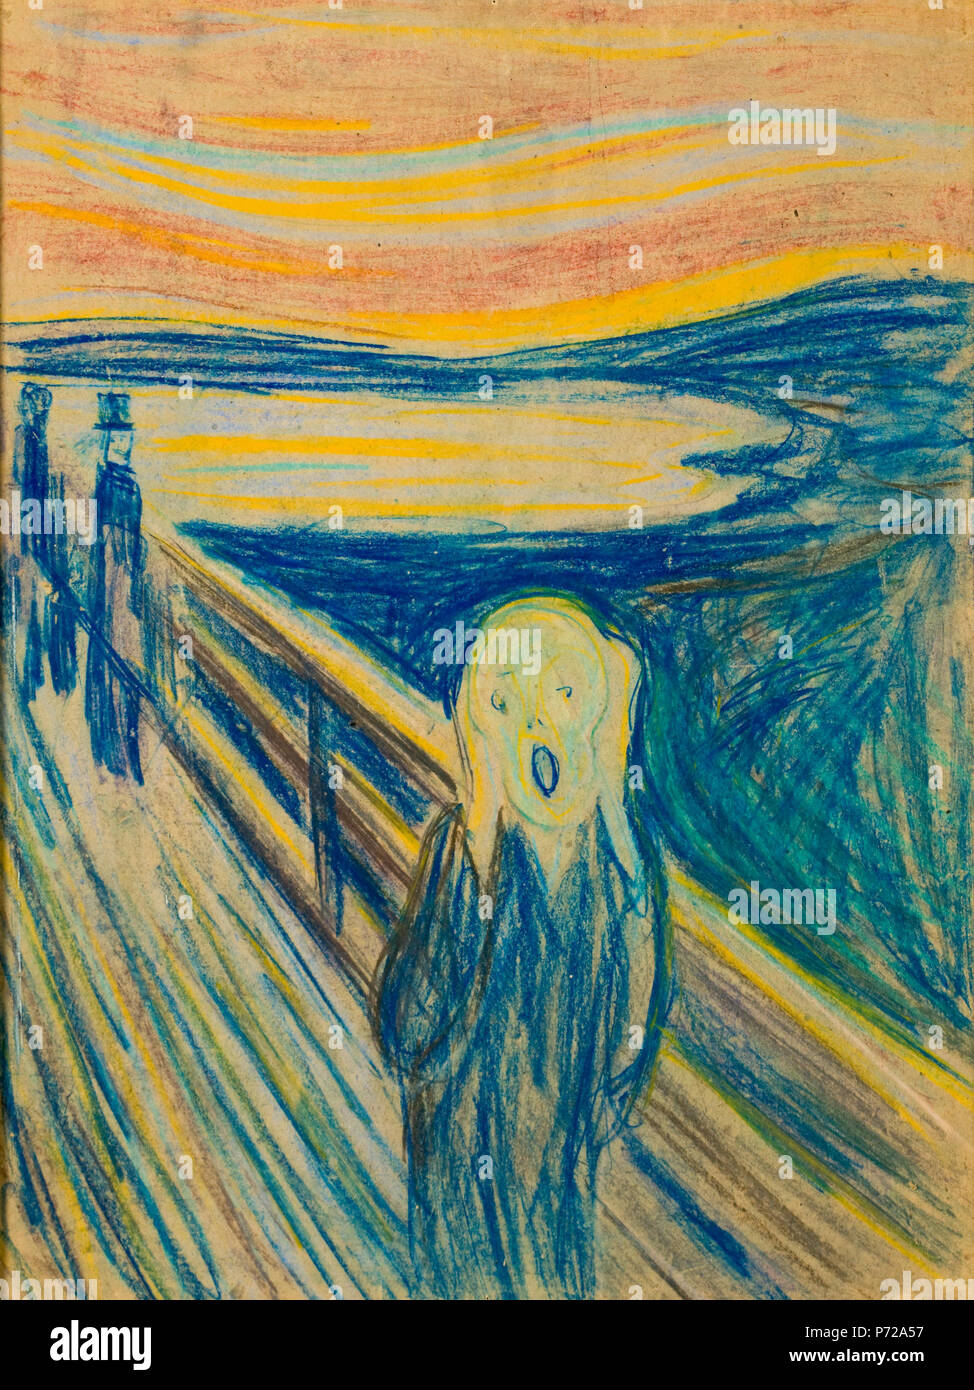 .  English: The Scream .  English: As the earliest version of 'The Scream', this pastel appears to be the sketch in which Munch mapped out the essentials of the composition. . 1893 46 Skrik 1893 Stock Photo